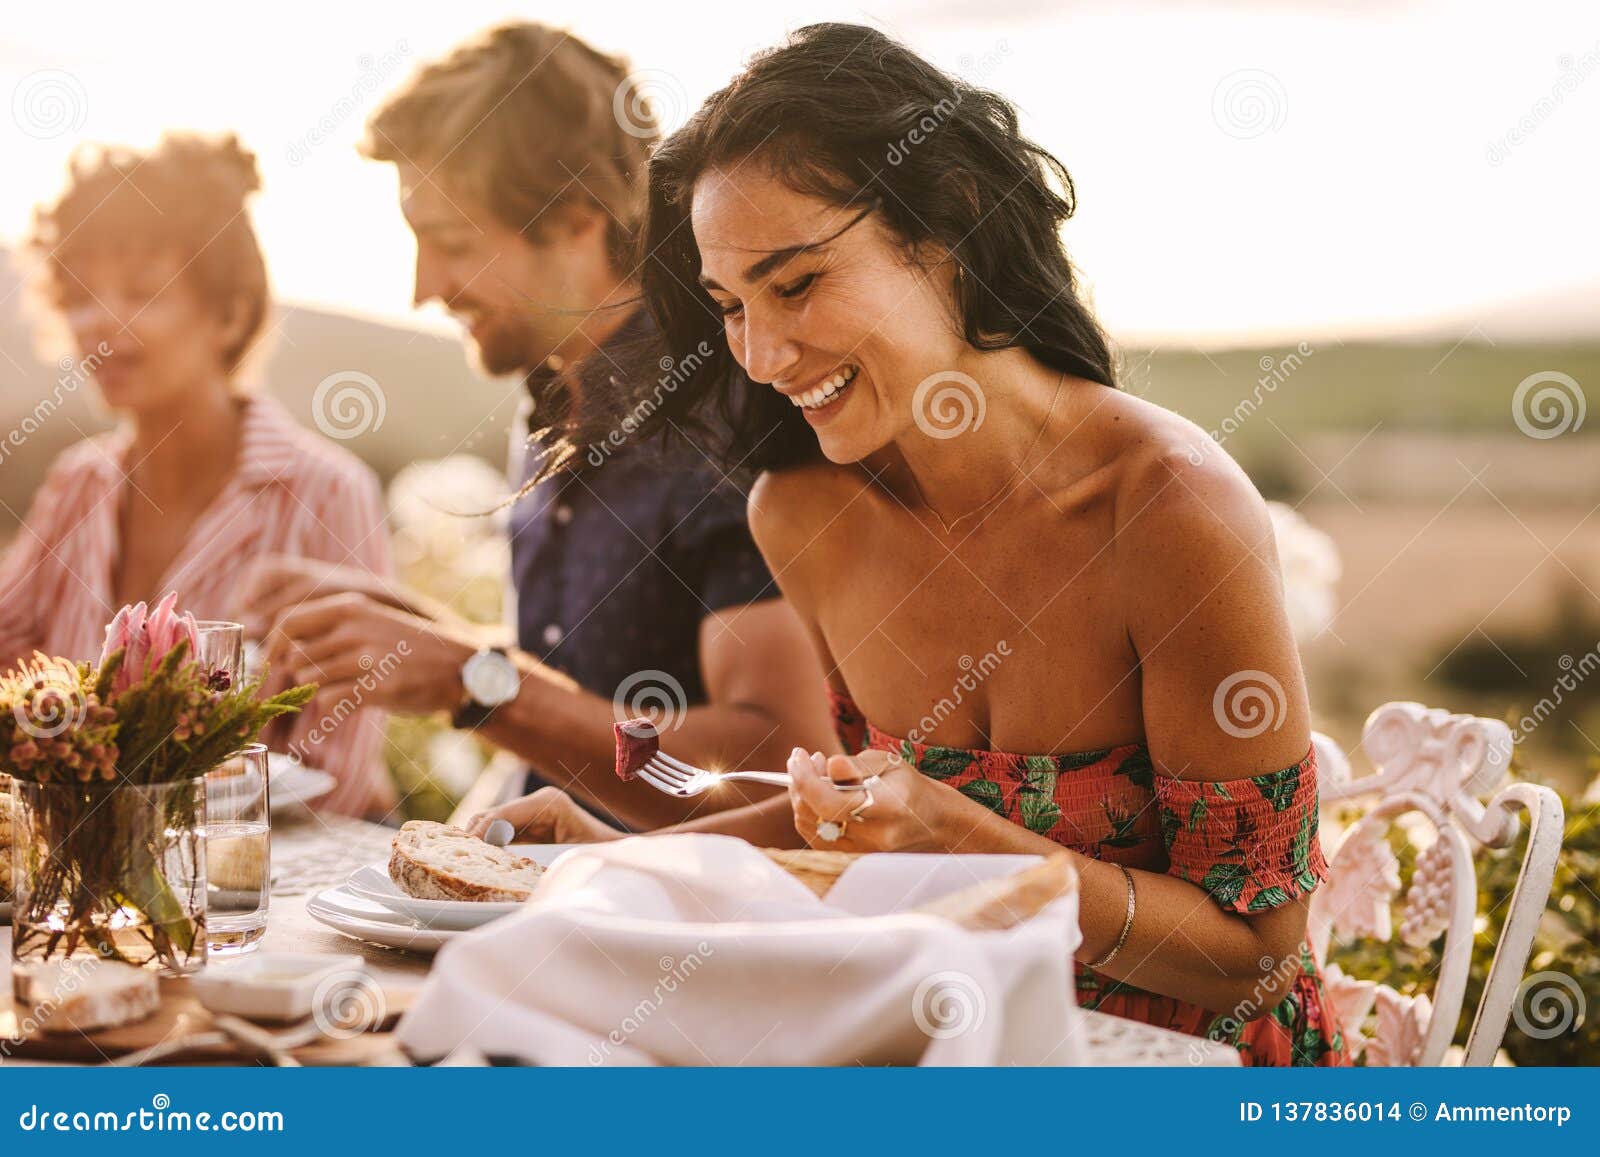 Woman Enjoying Having Food With Friends At A Party Stock